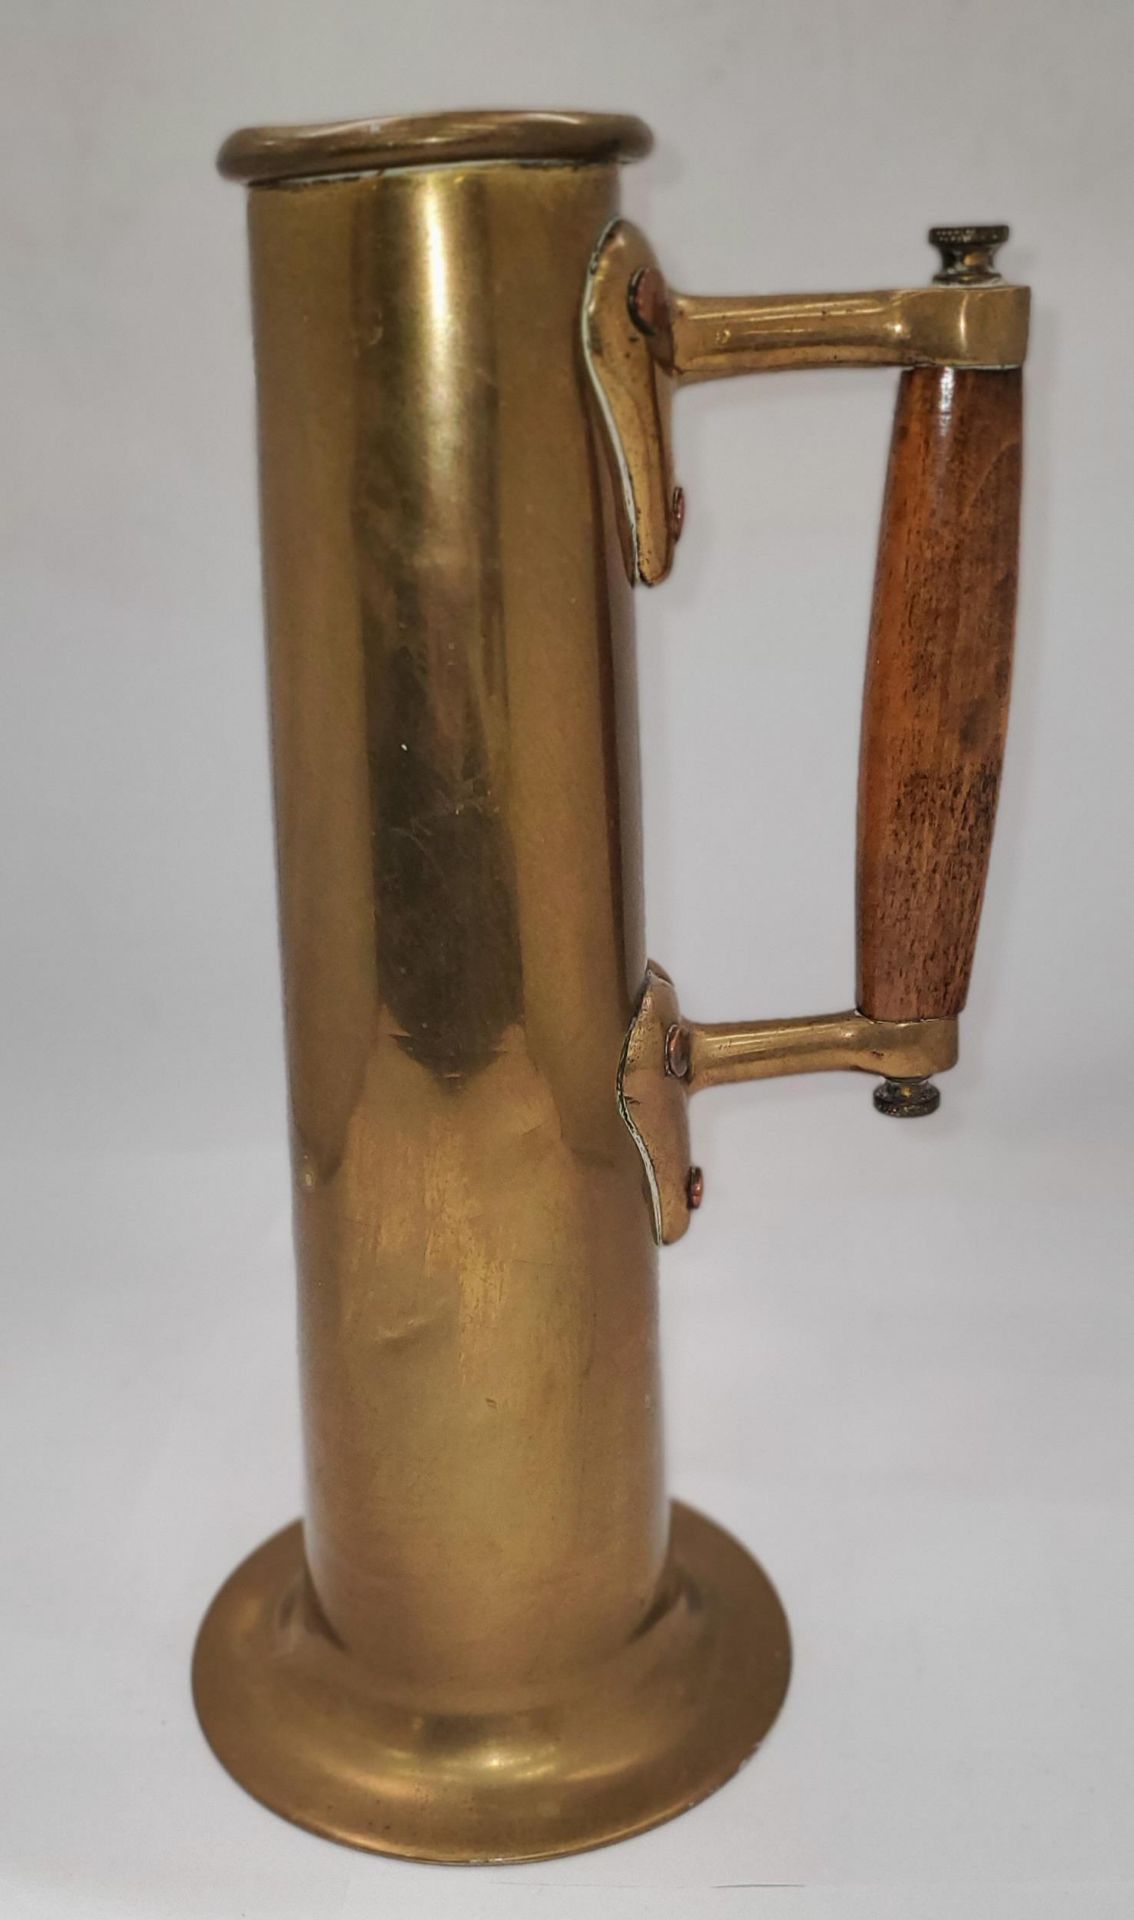 A VINTAGE TALL BRASS ARTS AND CRAFTS STYLE TANKARD WITH WOODEN HANDLE, HEIGHT 29.5CM